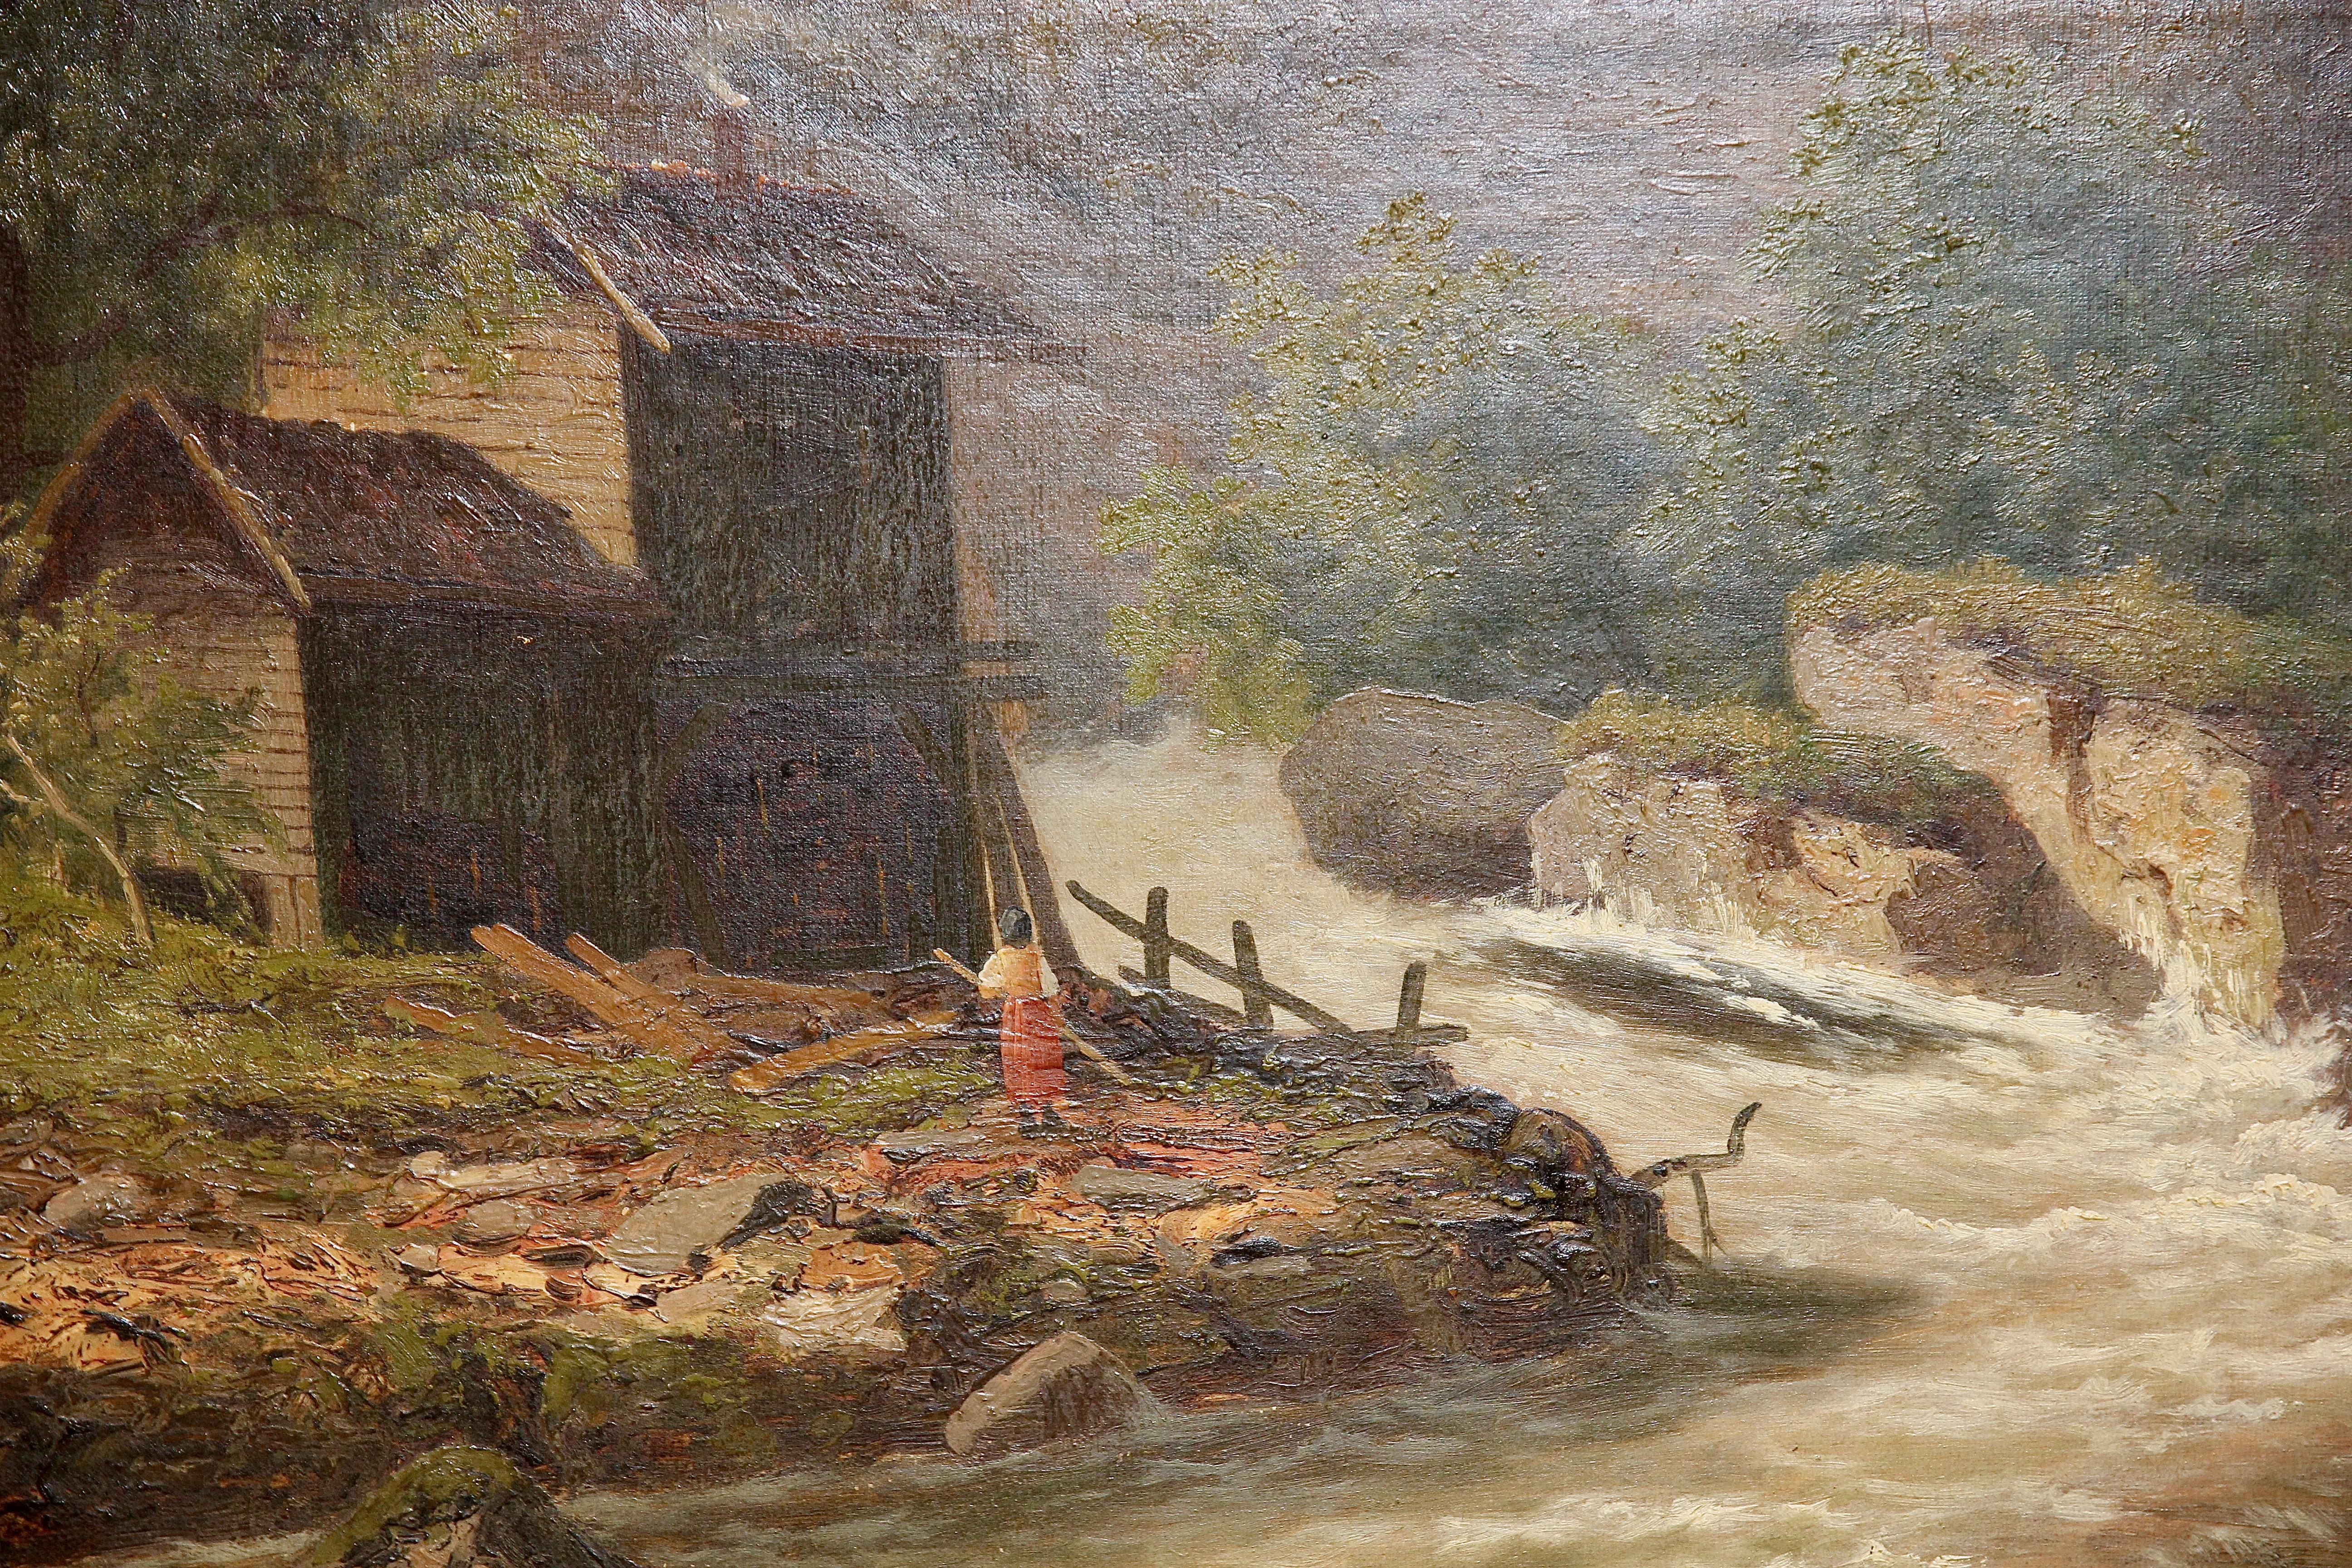 Oil painting, 19th century, river and mountain landscape.  - Brown Landscape Painting by Unknown